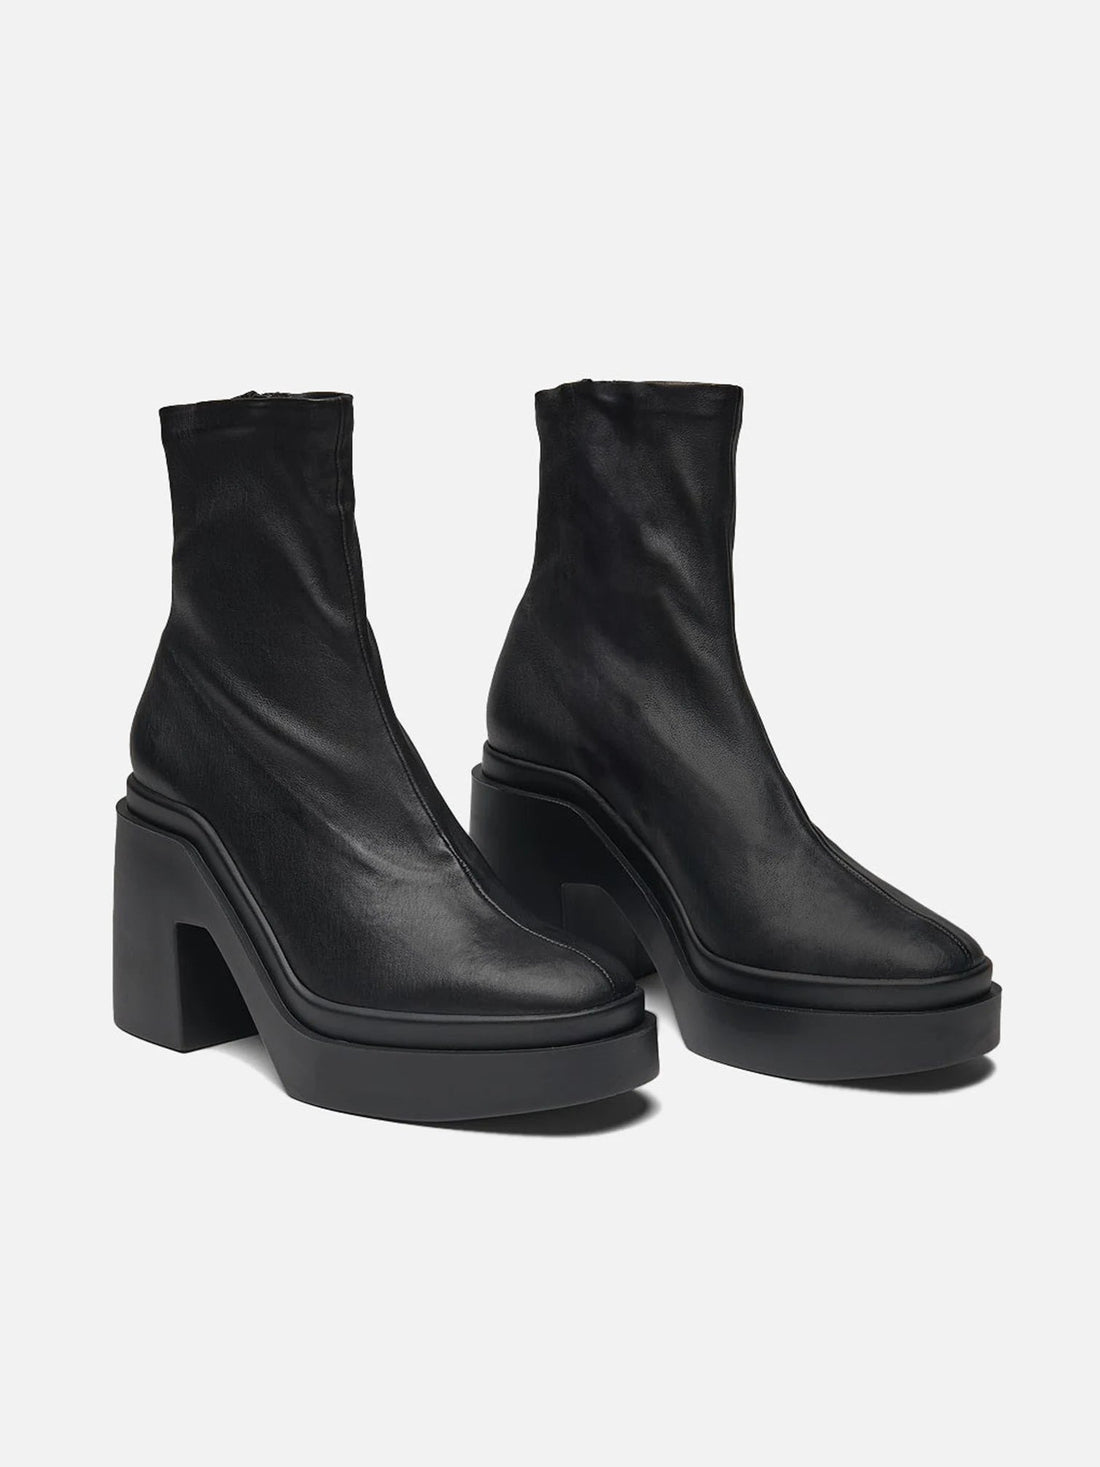 ANKLE BOOTS - NINA ankle boots, leather black - 3606063979603 - Clergerie Paris - Europe